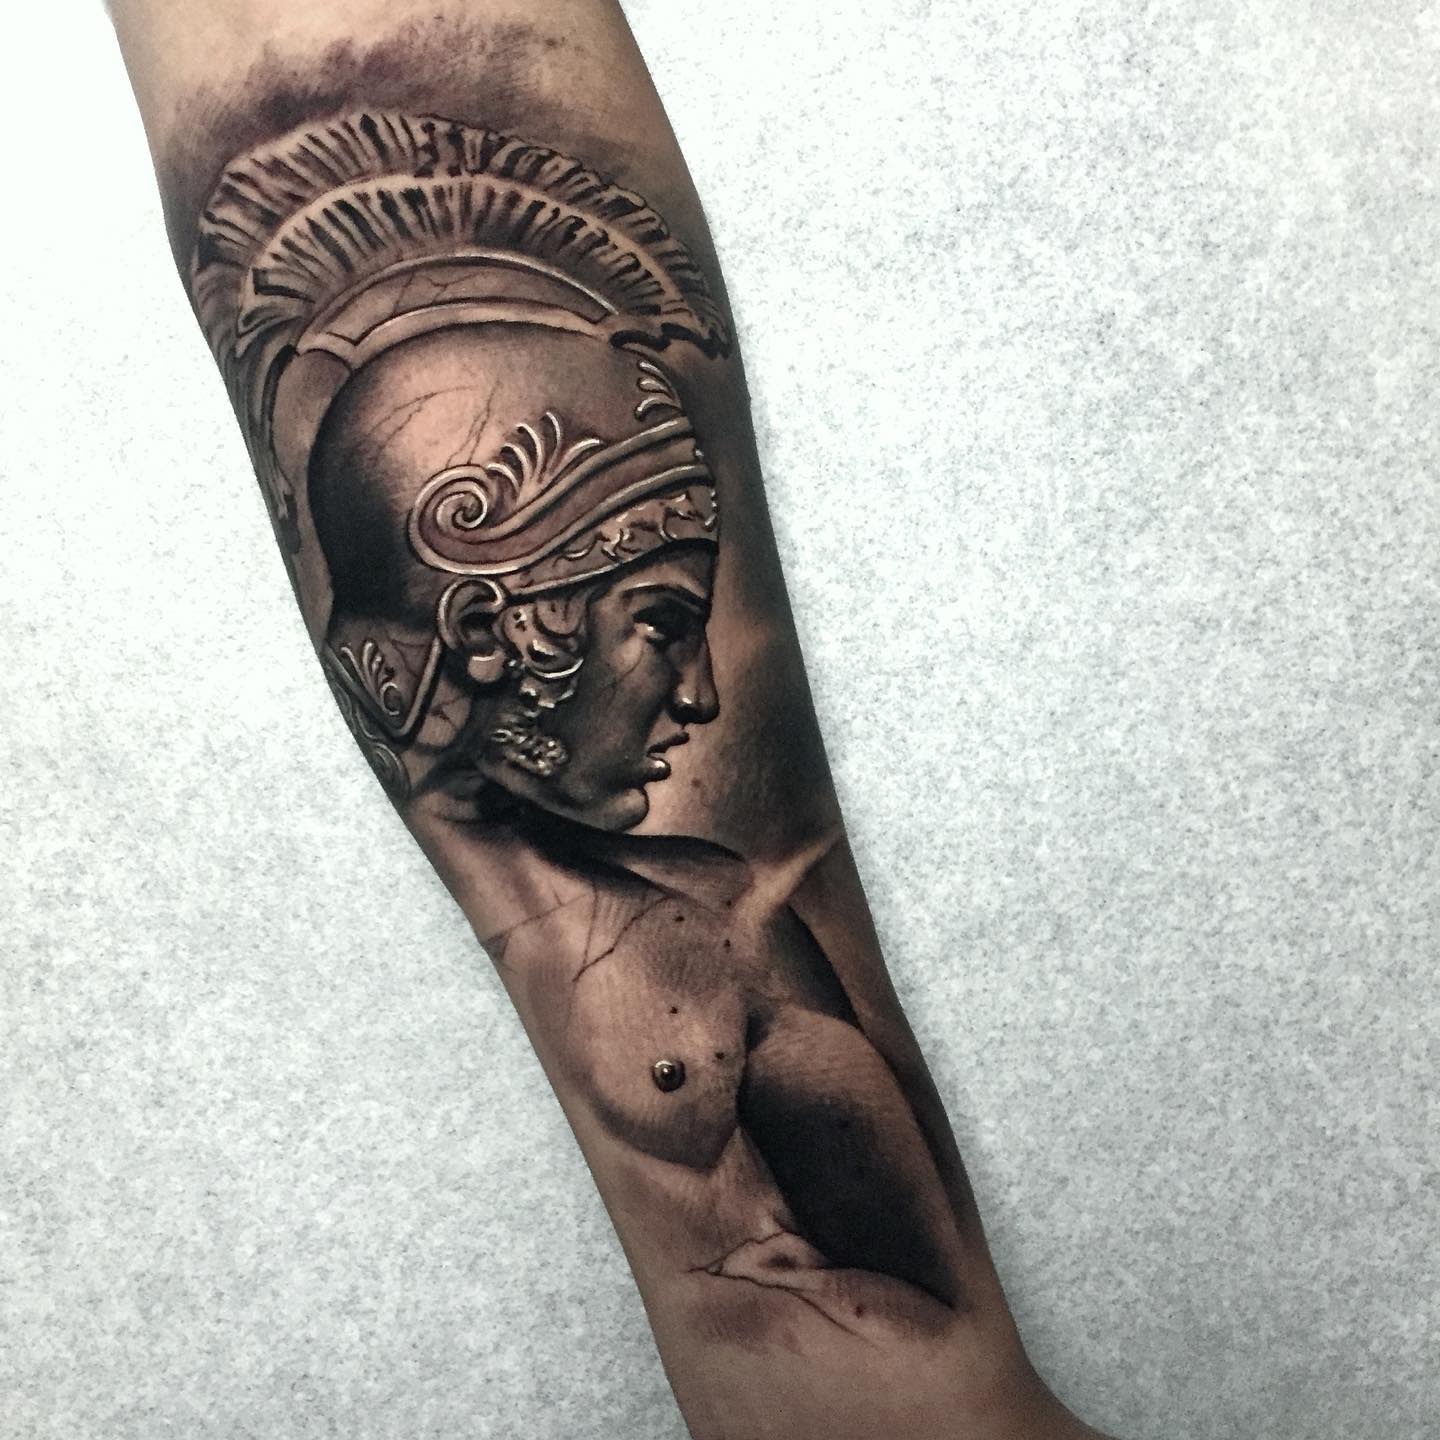 64 Spartan Tattoo Ideas To Embrace Your Inner Warrior, this is sparta tattoo  - thirstymag.com